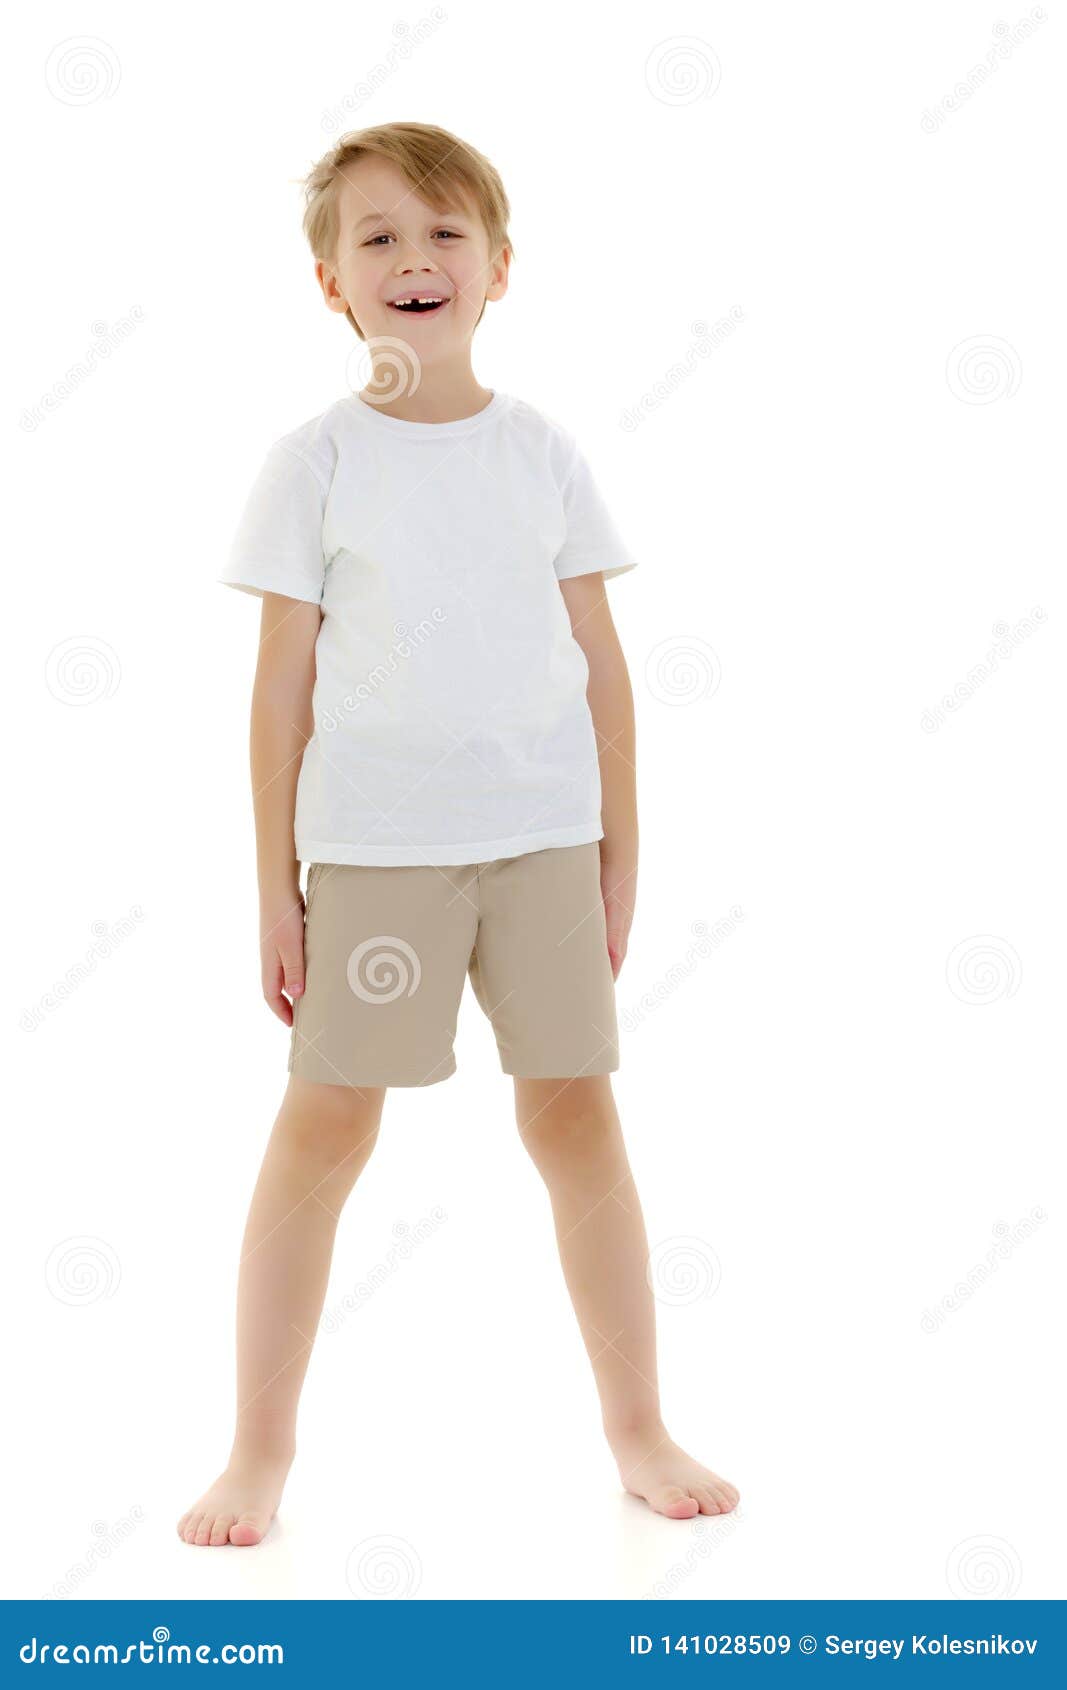 Emotional Little Boy In A Pure White T-shirt. Stock Image - Image of ...